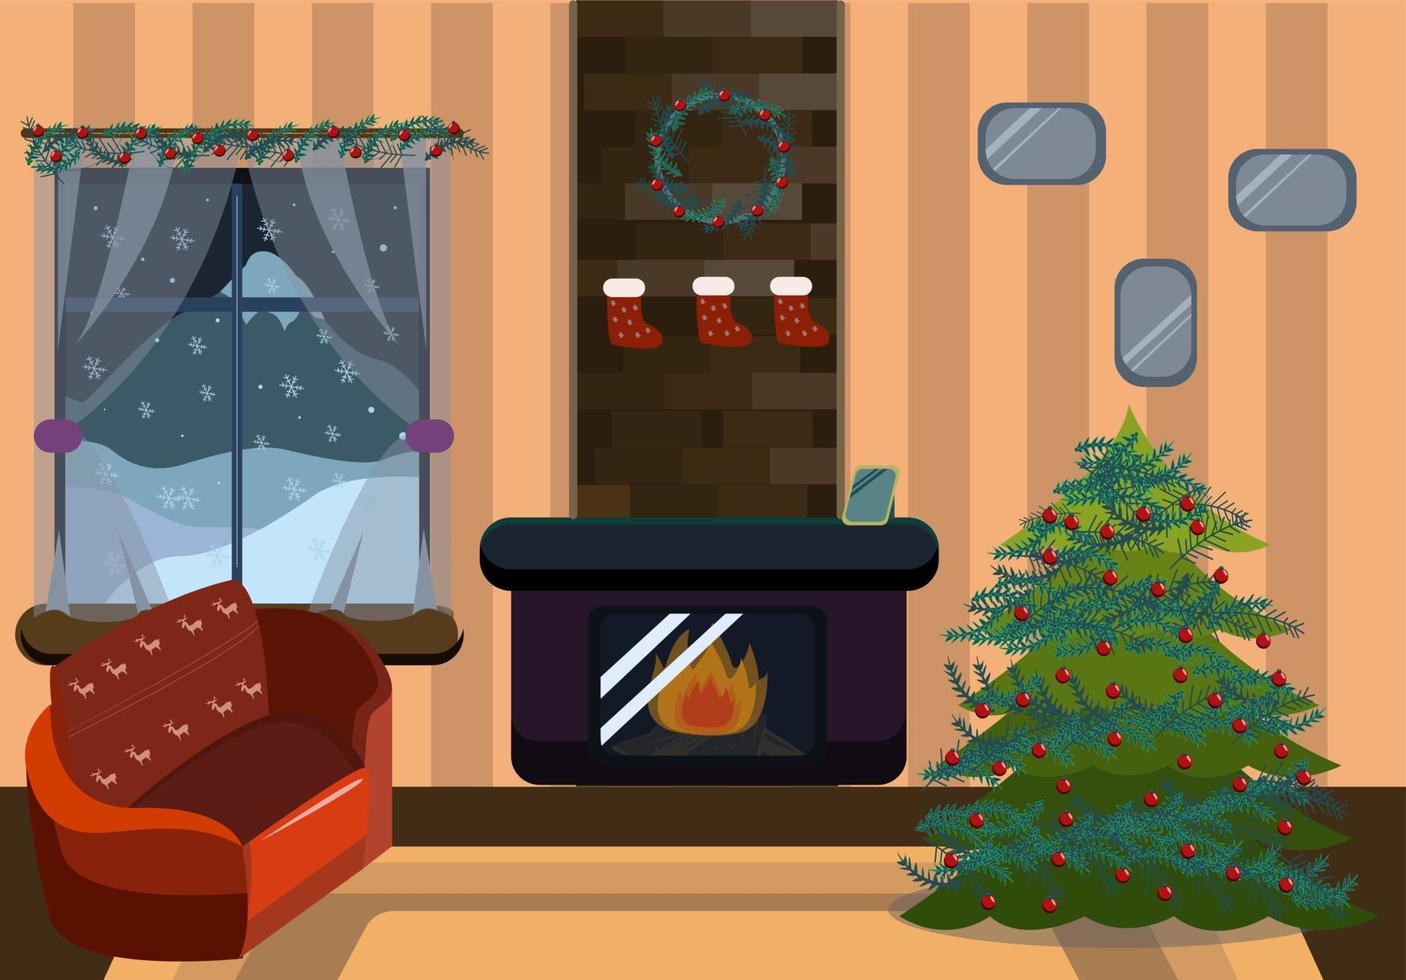 TLiving room in the house before Christmas vector